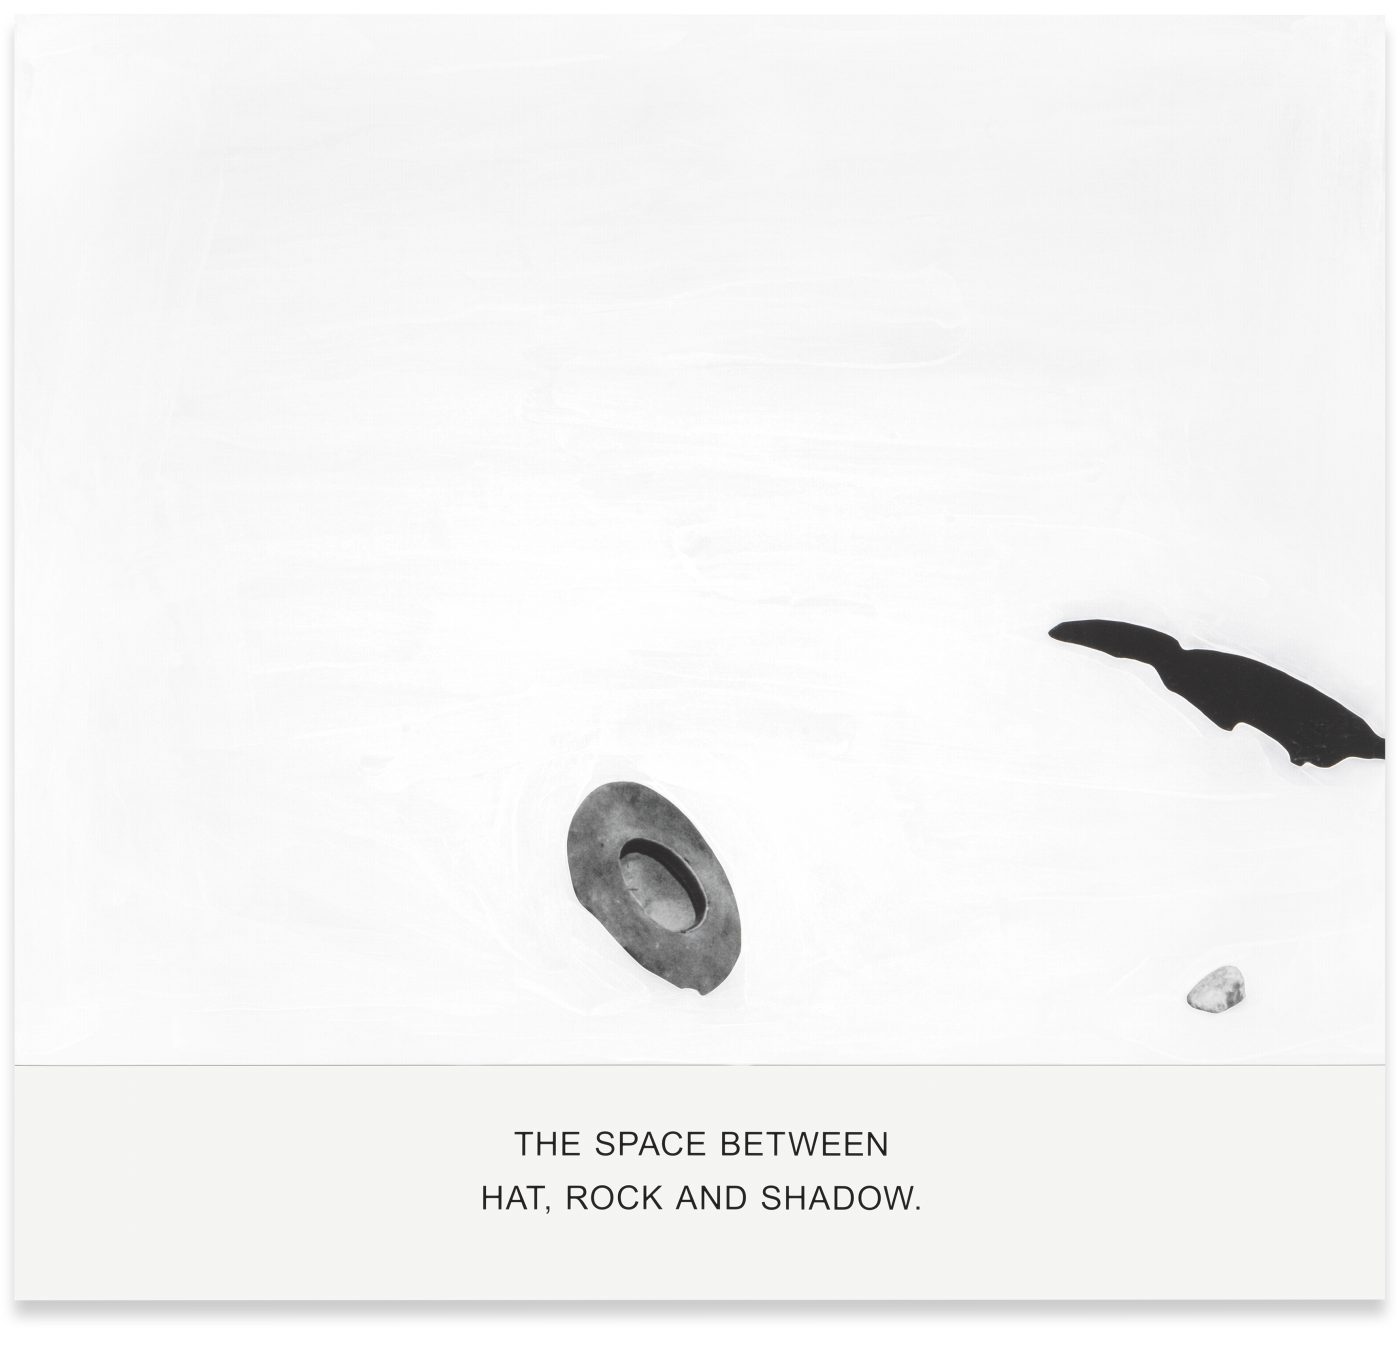 The Space Between Hat, Rock and Shadow, 2019, by John Baldessari